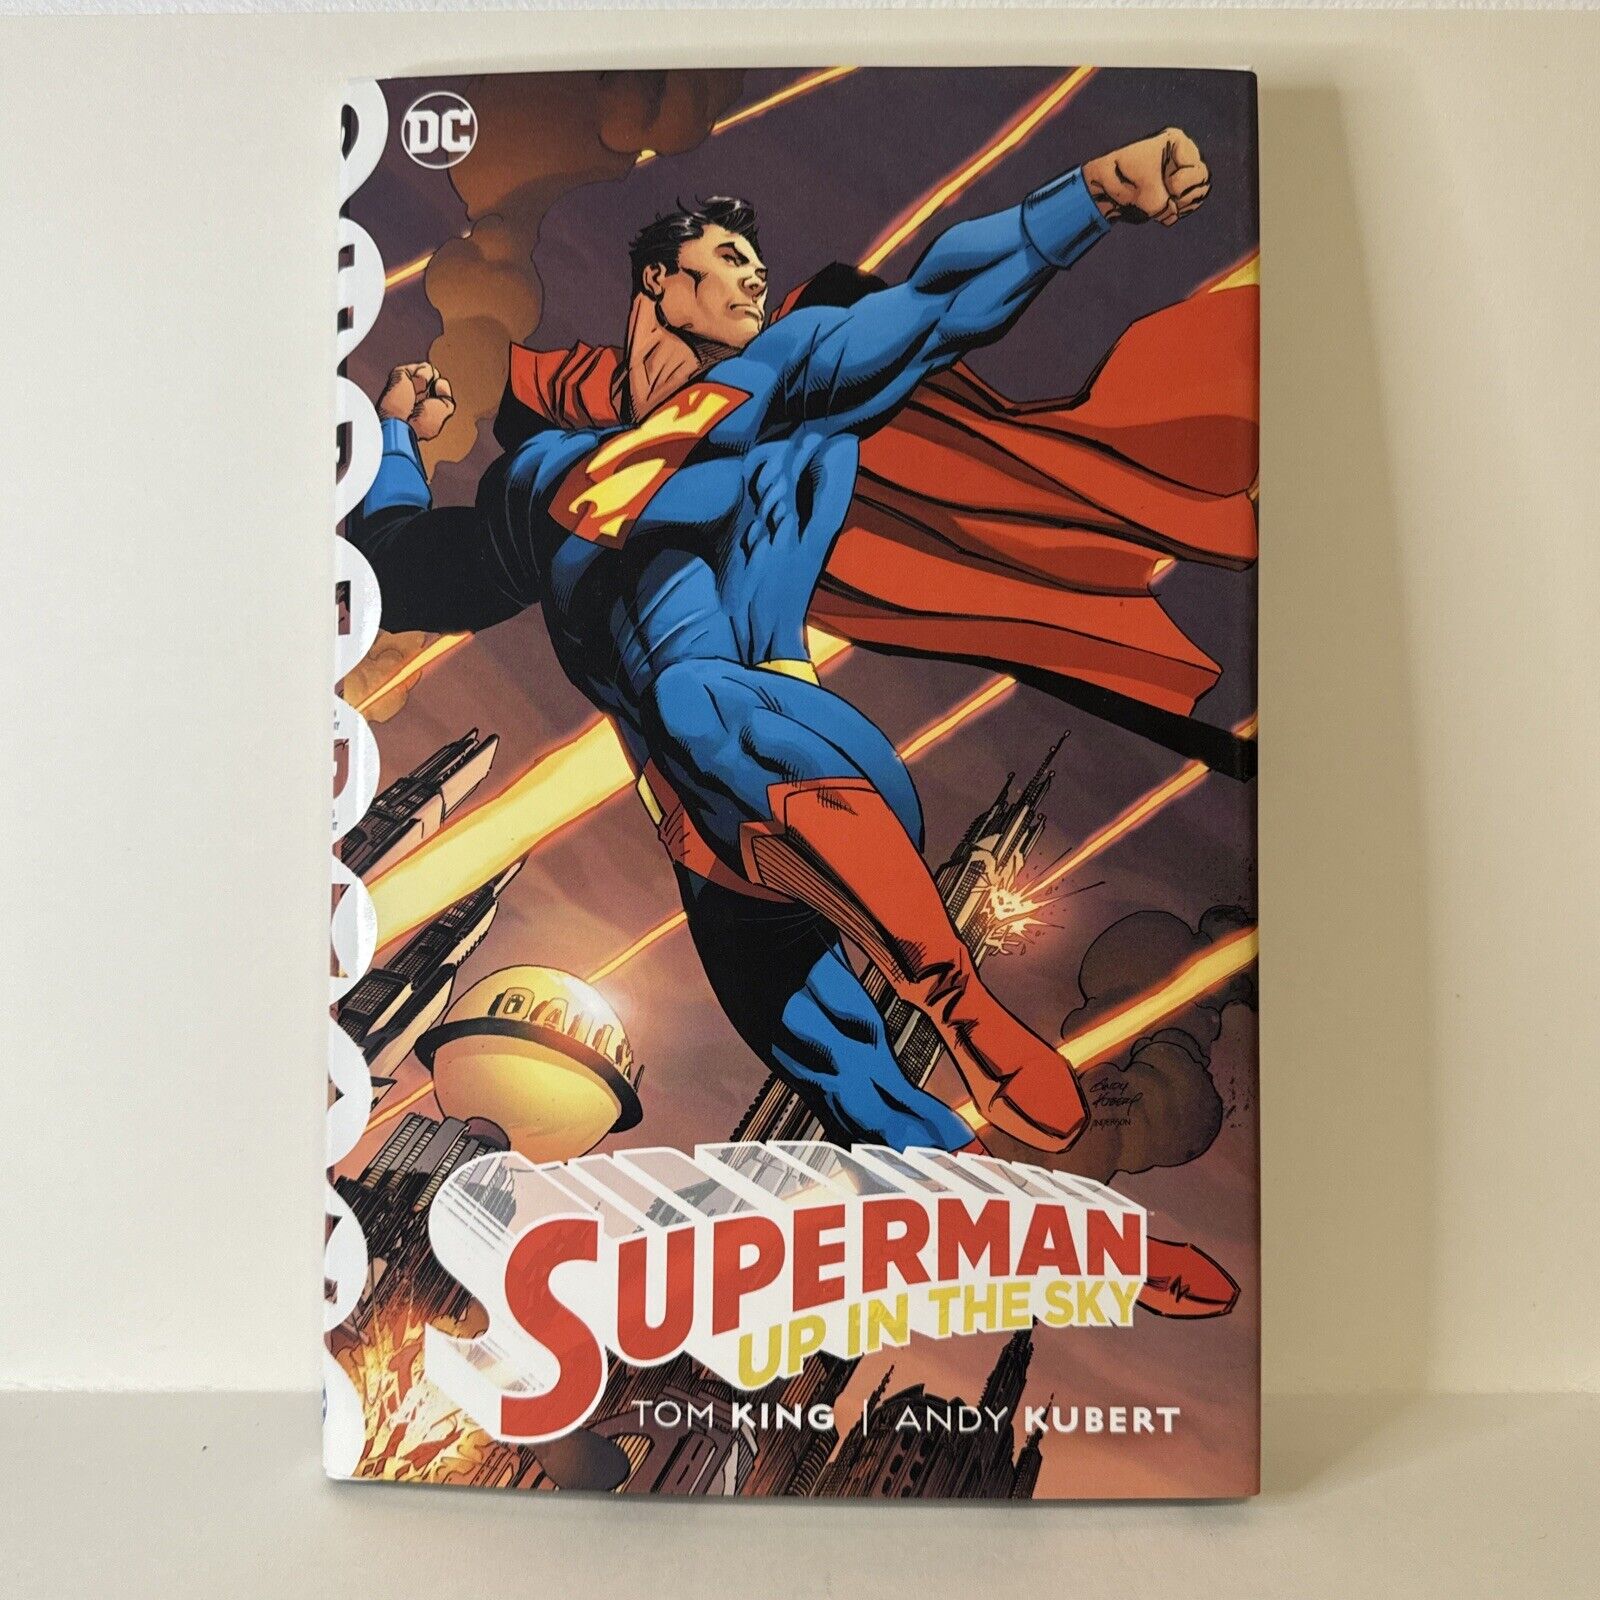 SUPERMAN: UP IN THE SKY Hardcover - Tom King, Andy Kubert - DC Comics.